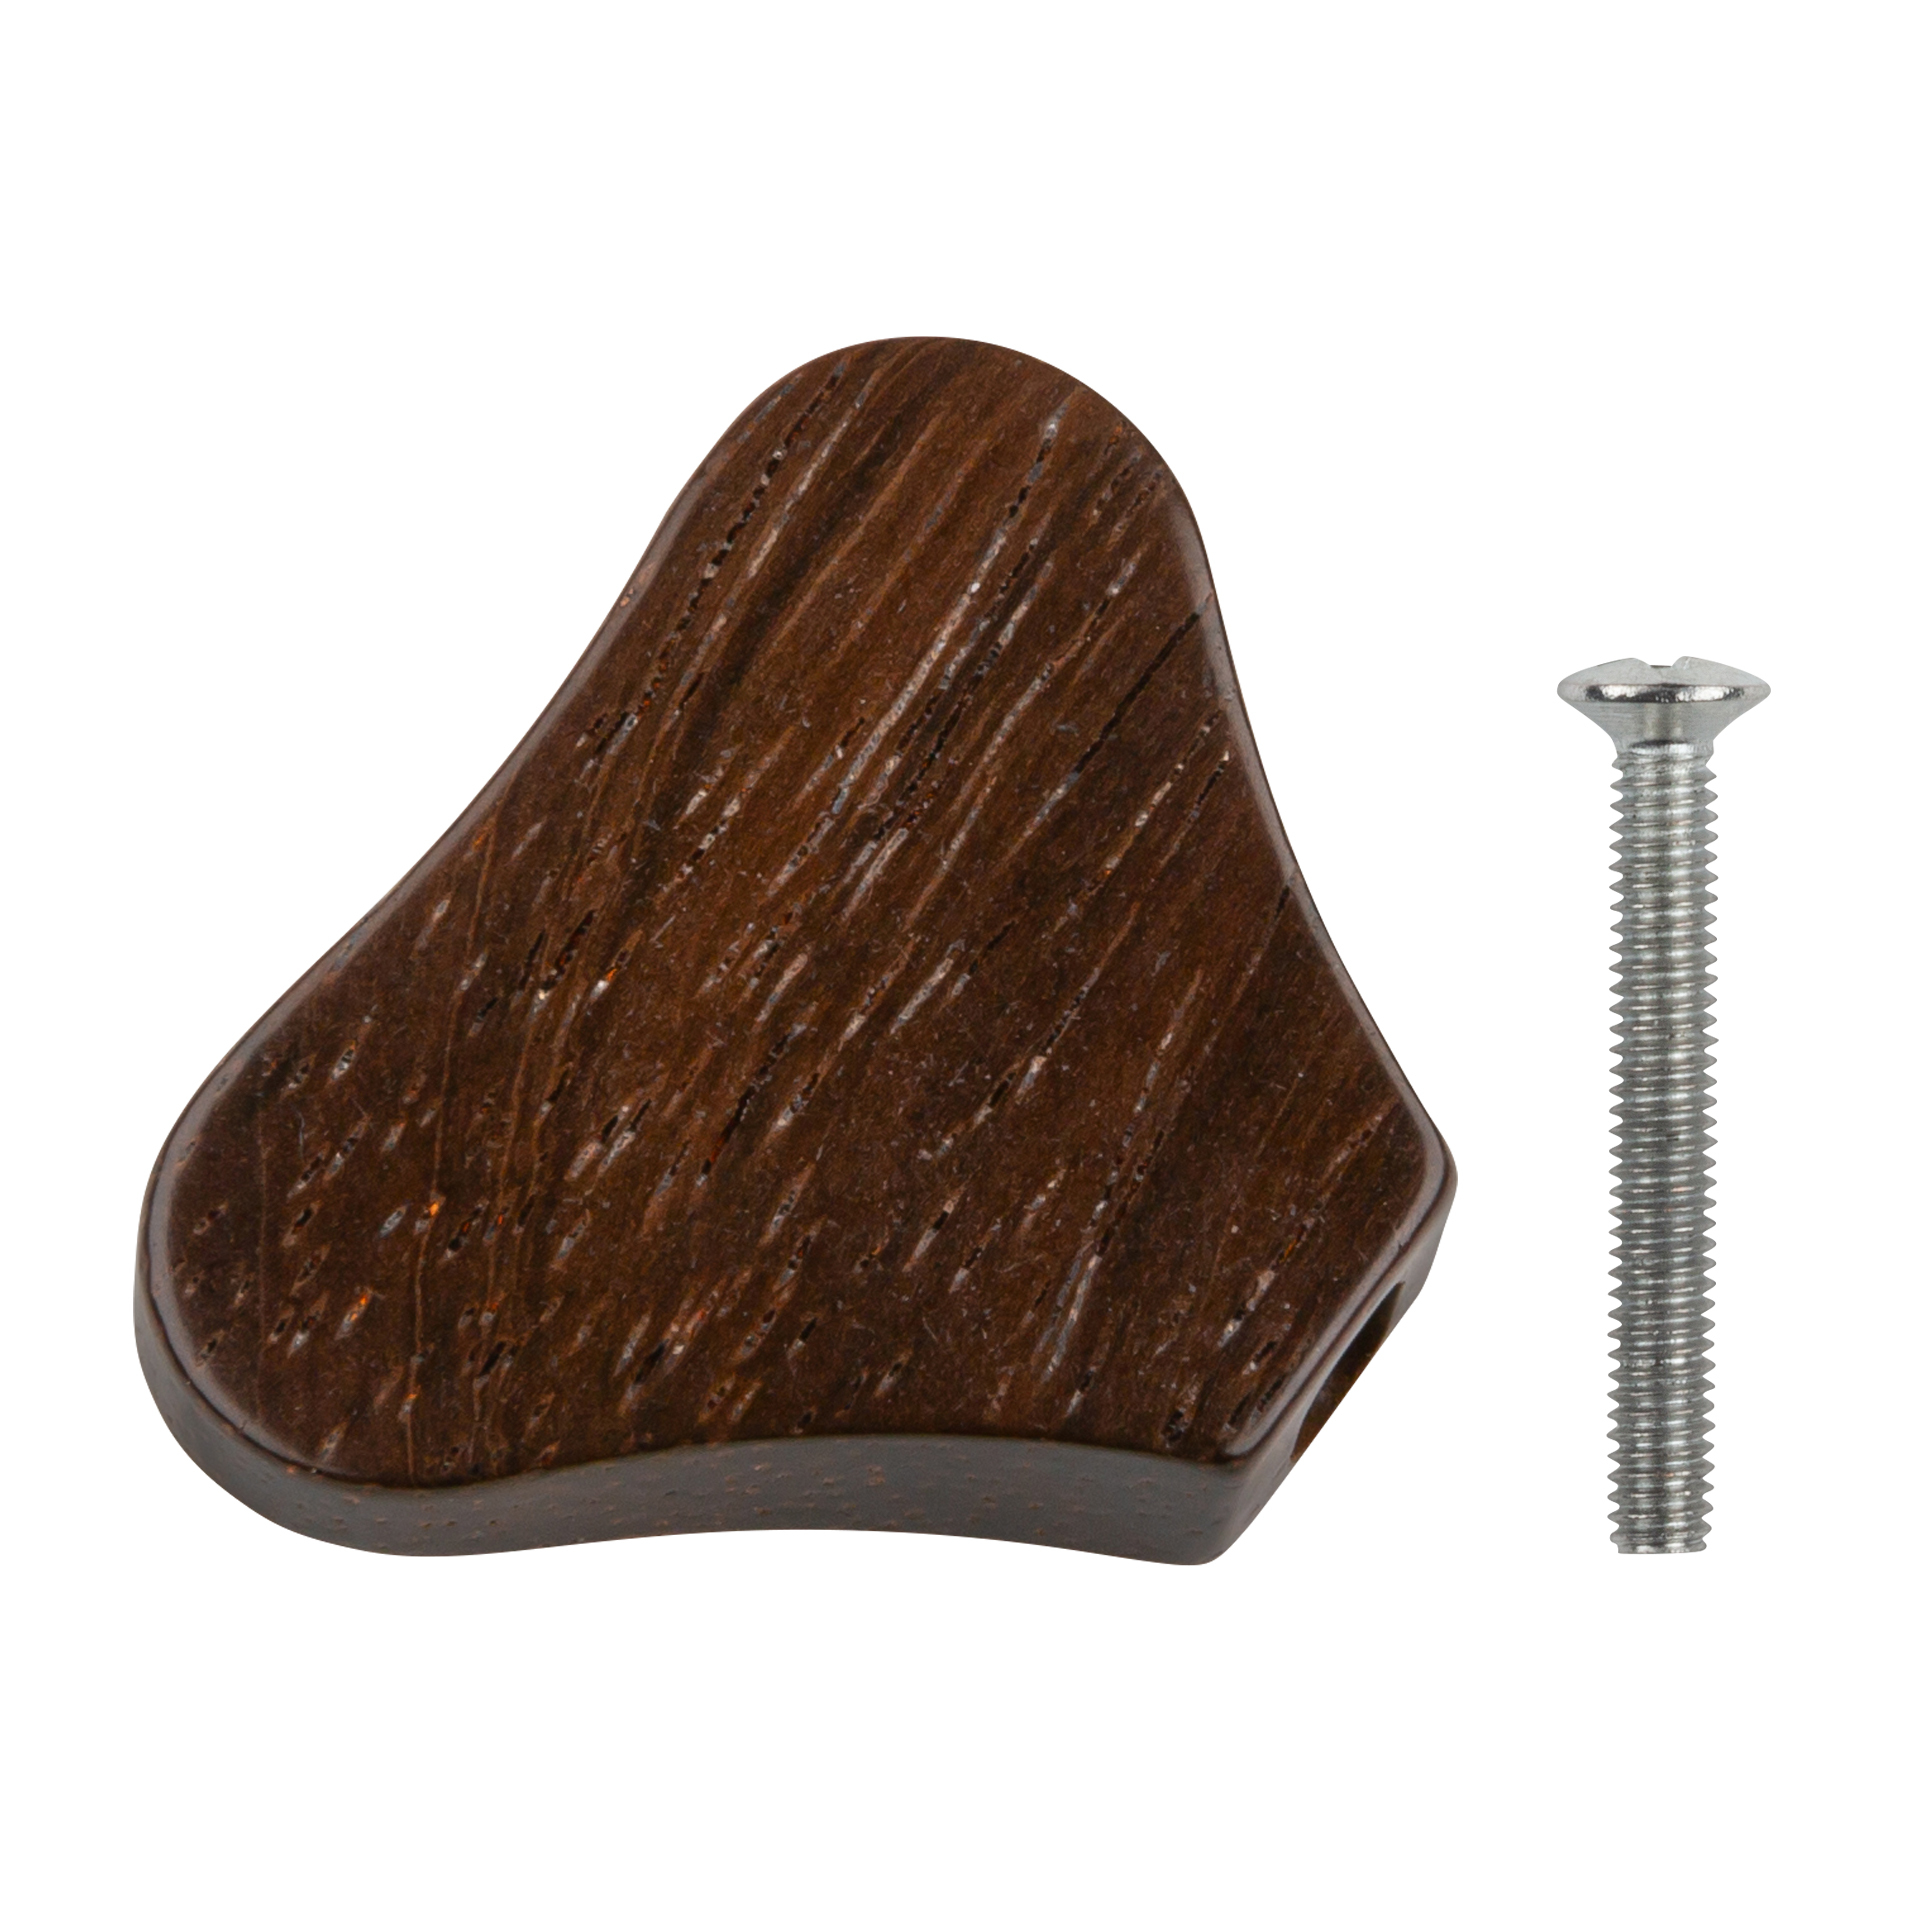 Warwick Parts - Wooden Peg for Warwick Machine Heads - Rio Rosewood (with Chrome Screw)